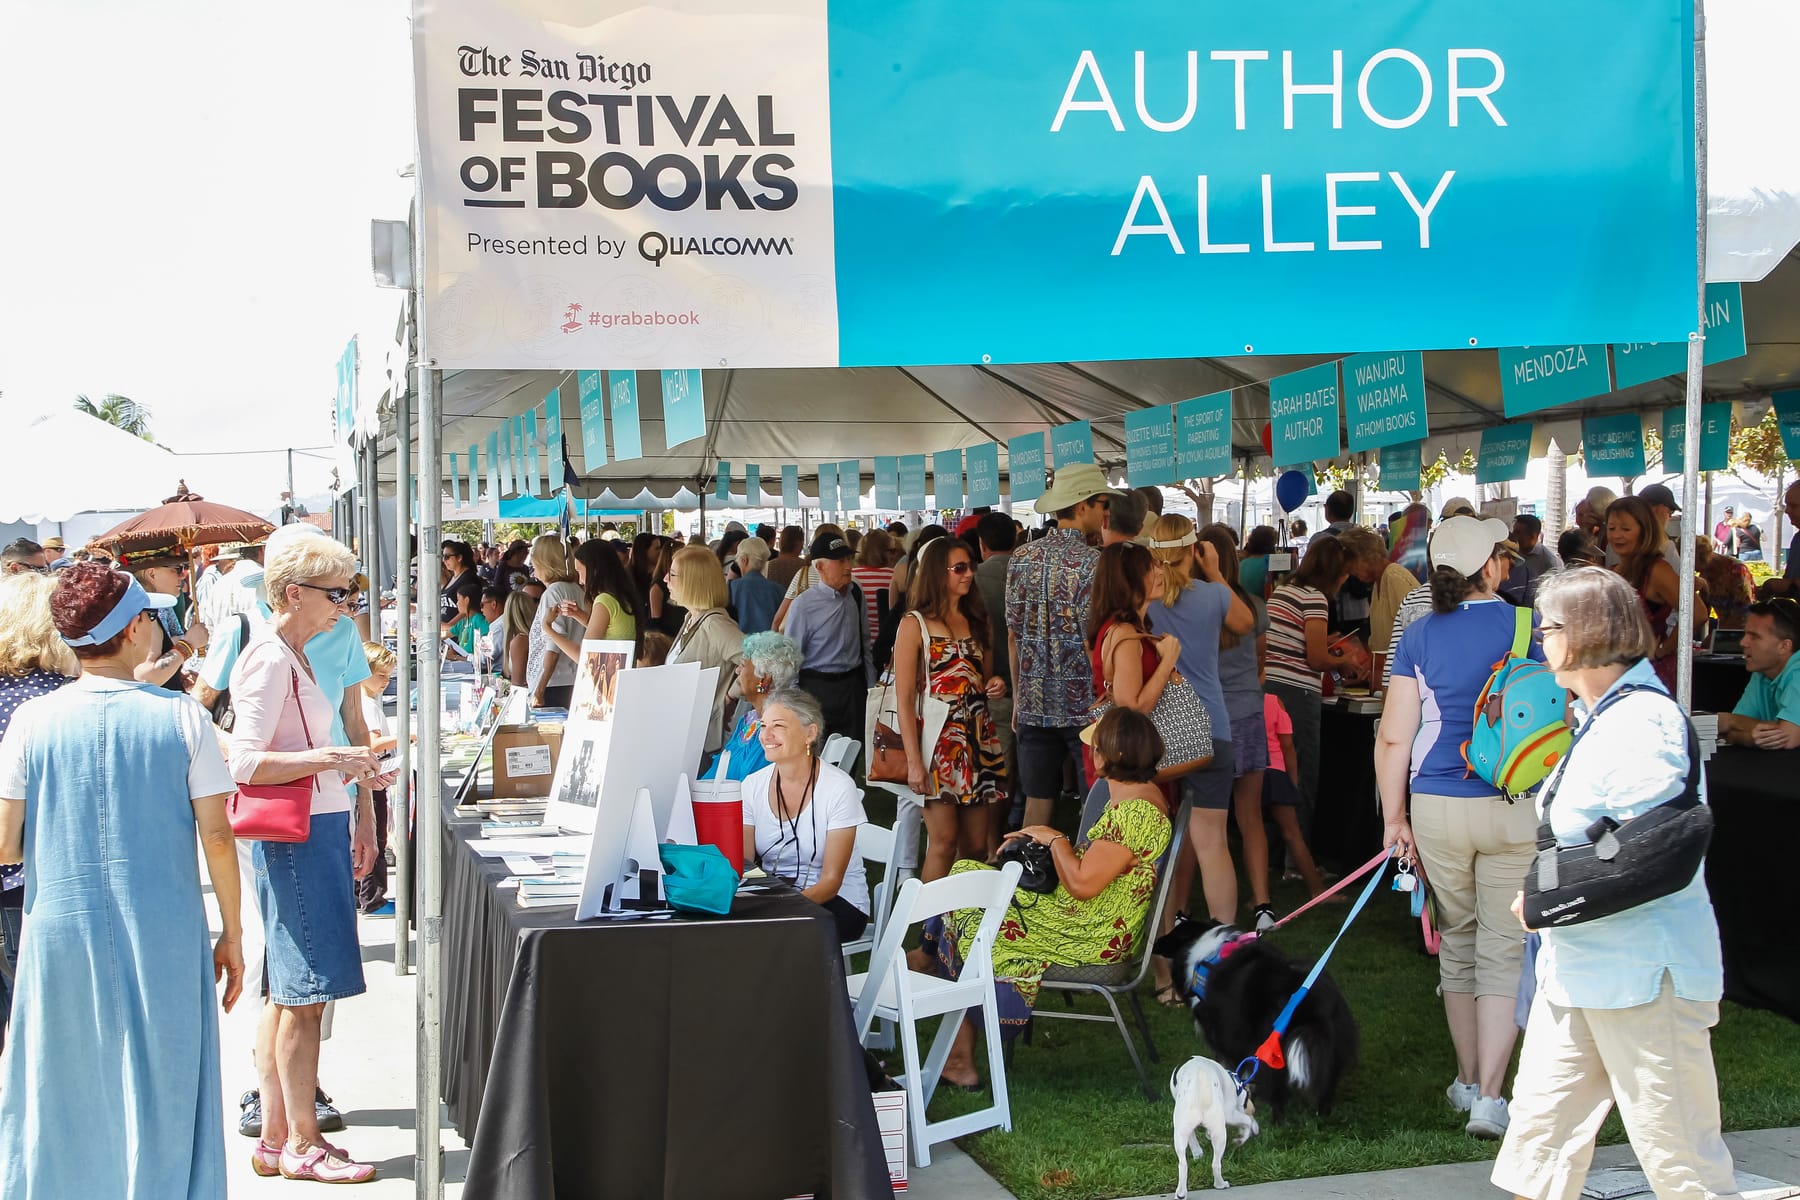 San Diego Festival of Books - Author Alley